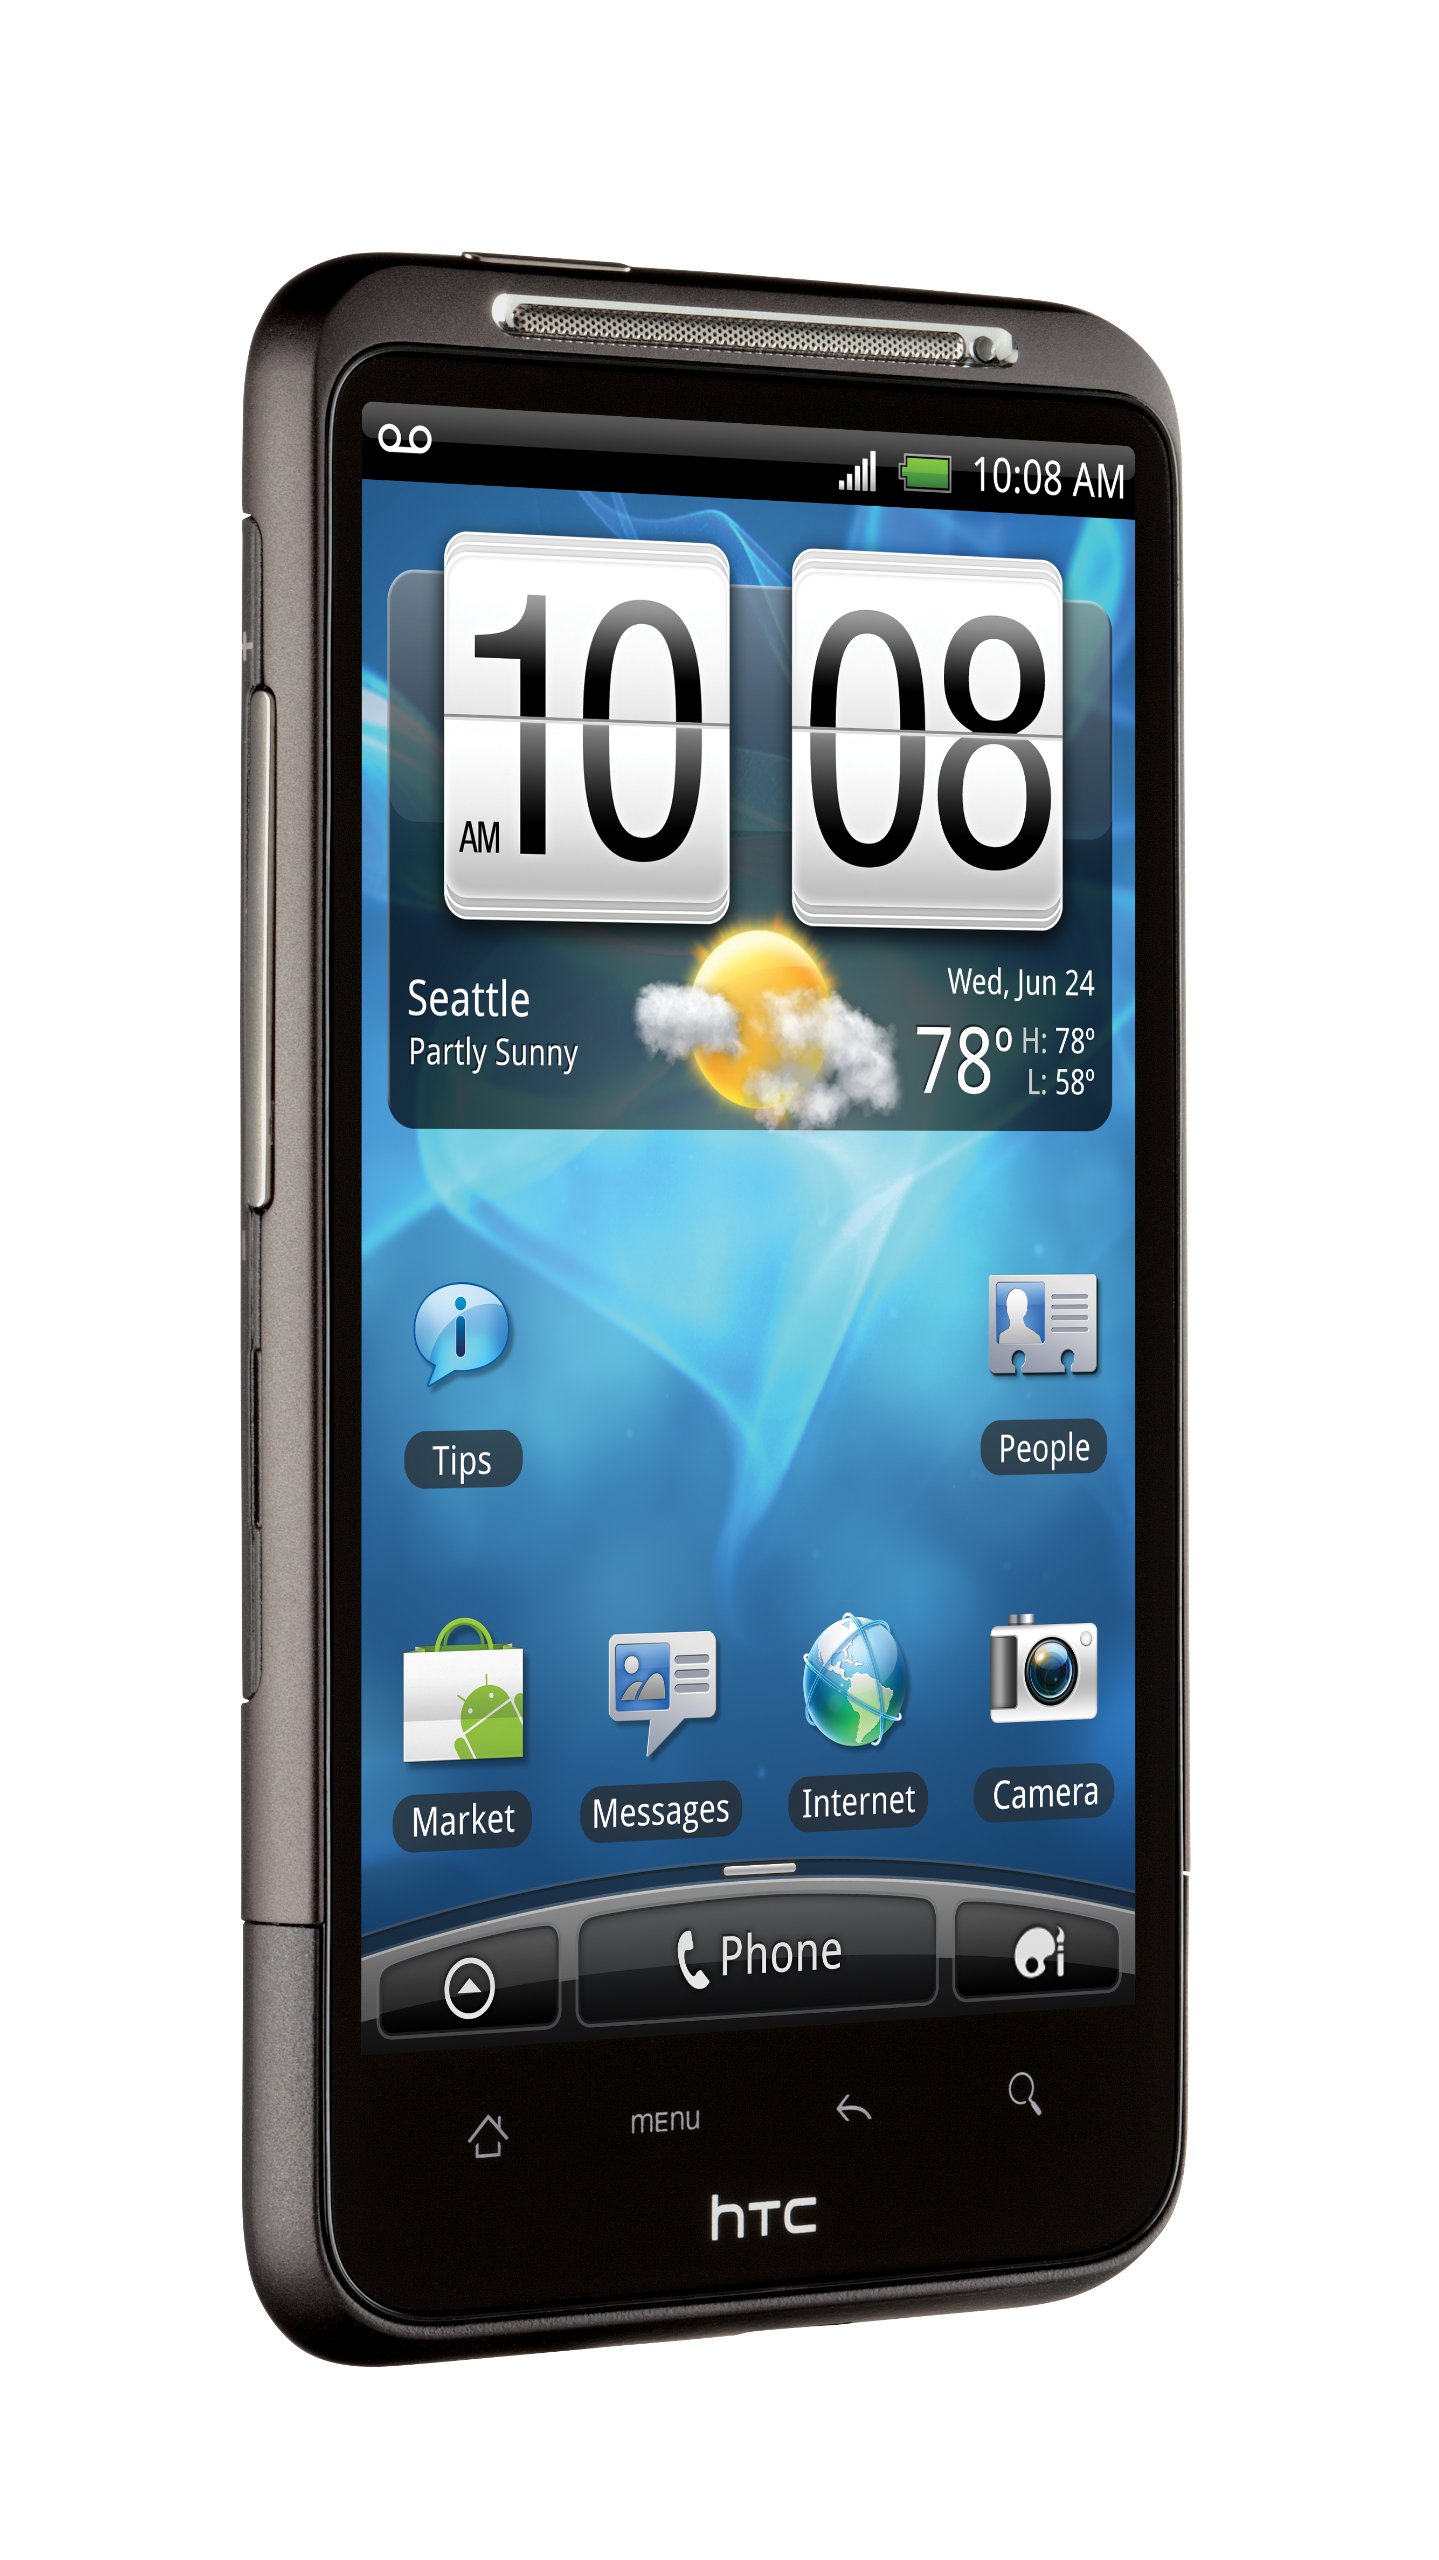 HTC Inspire 4G Android Phone, Black (AT&T)